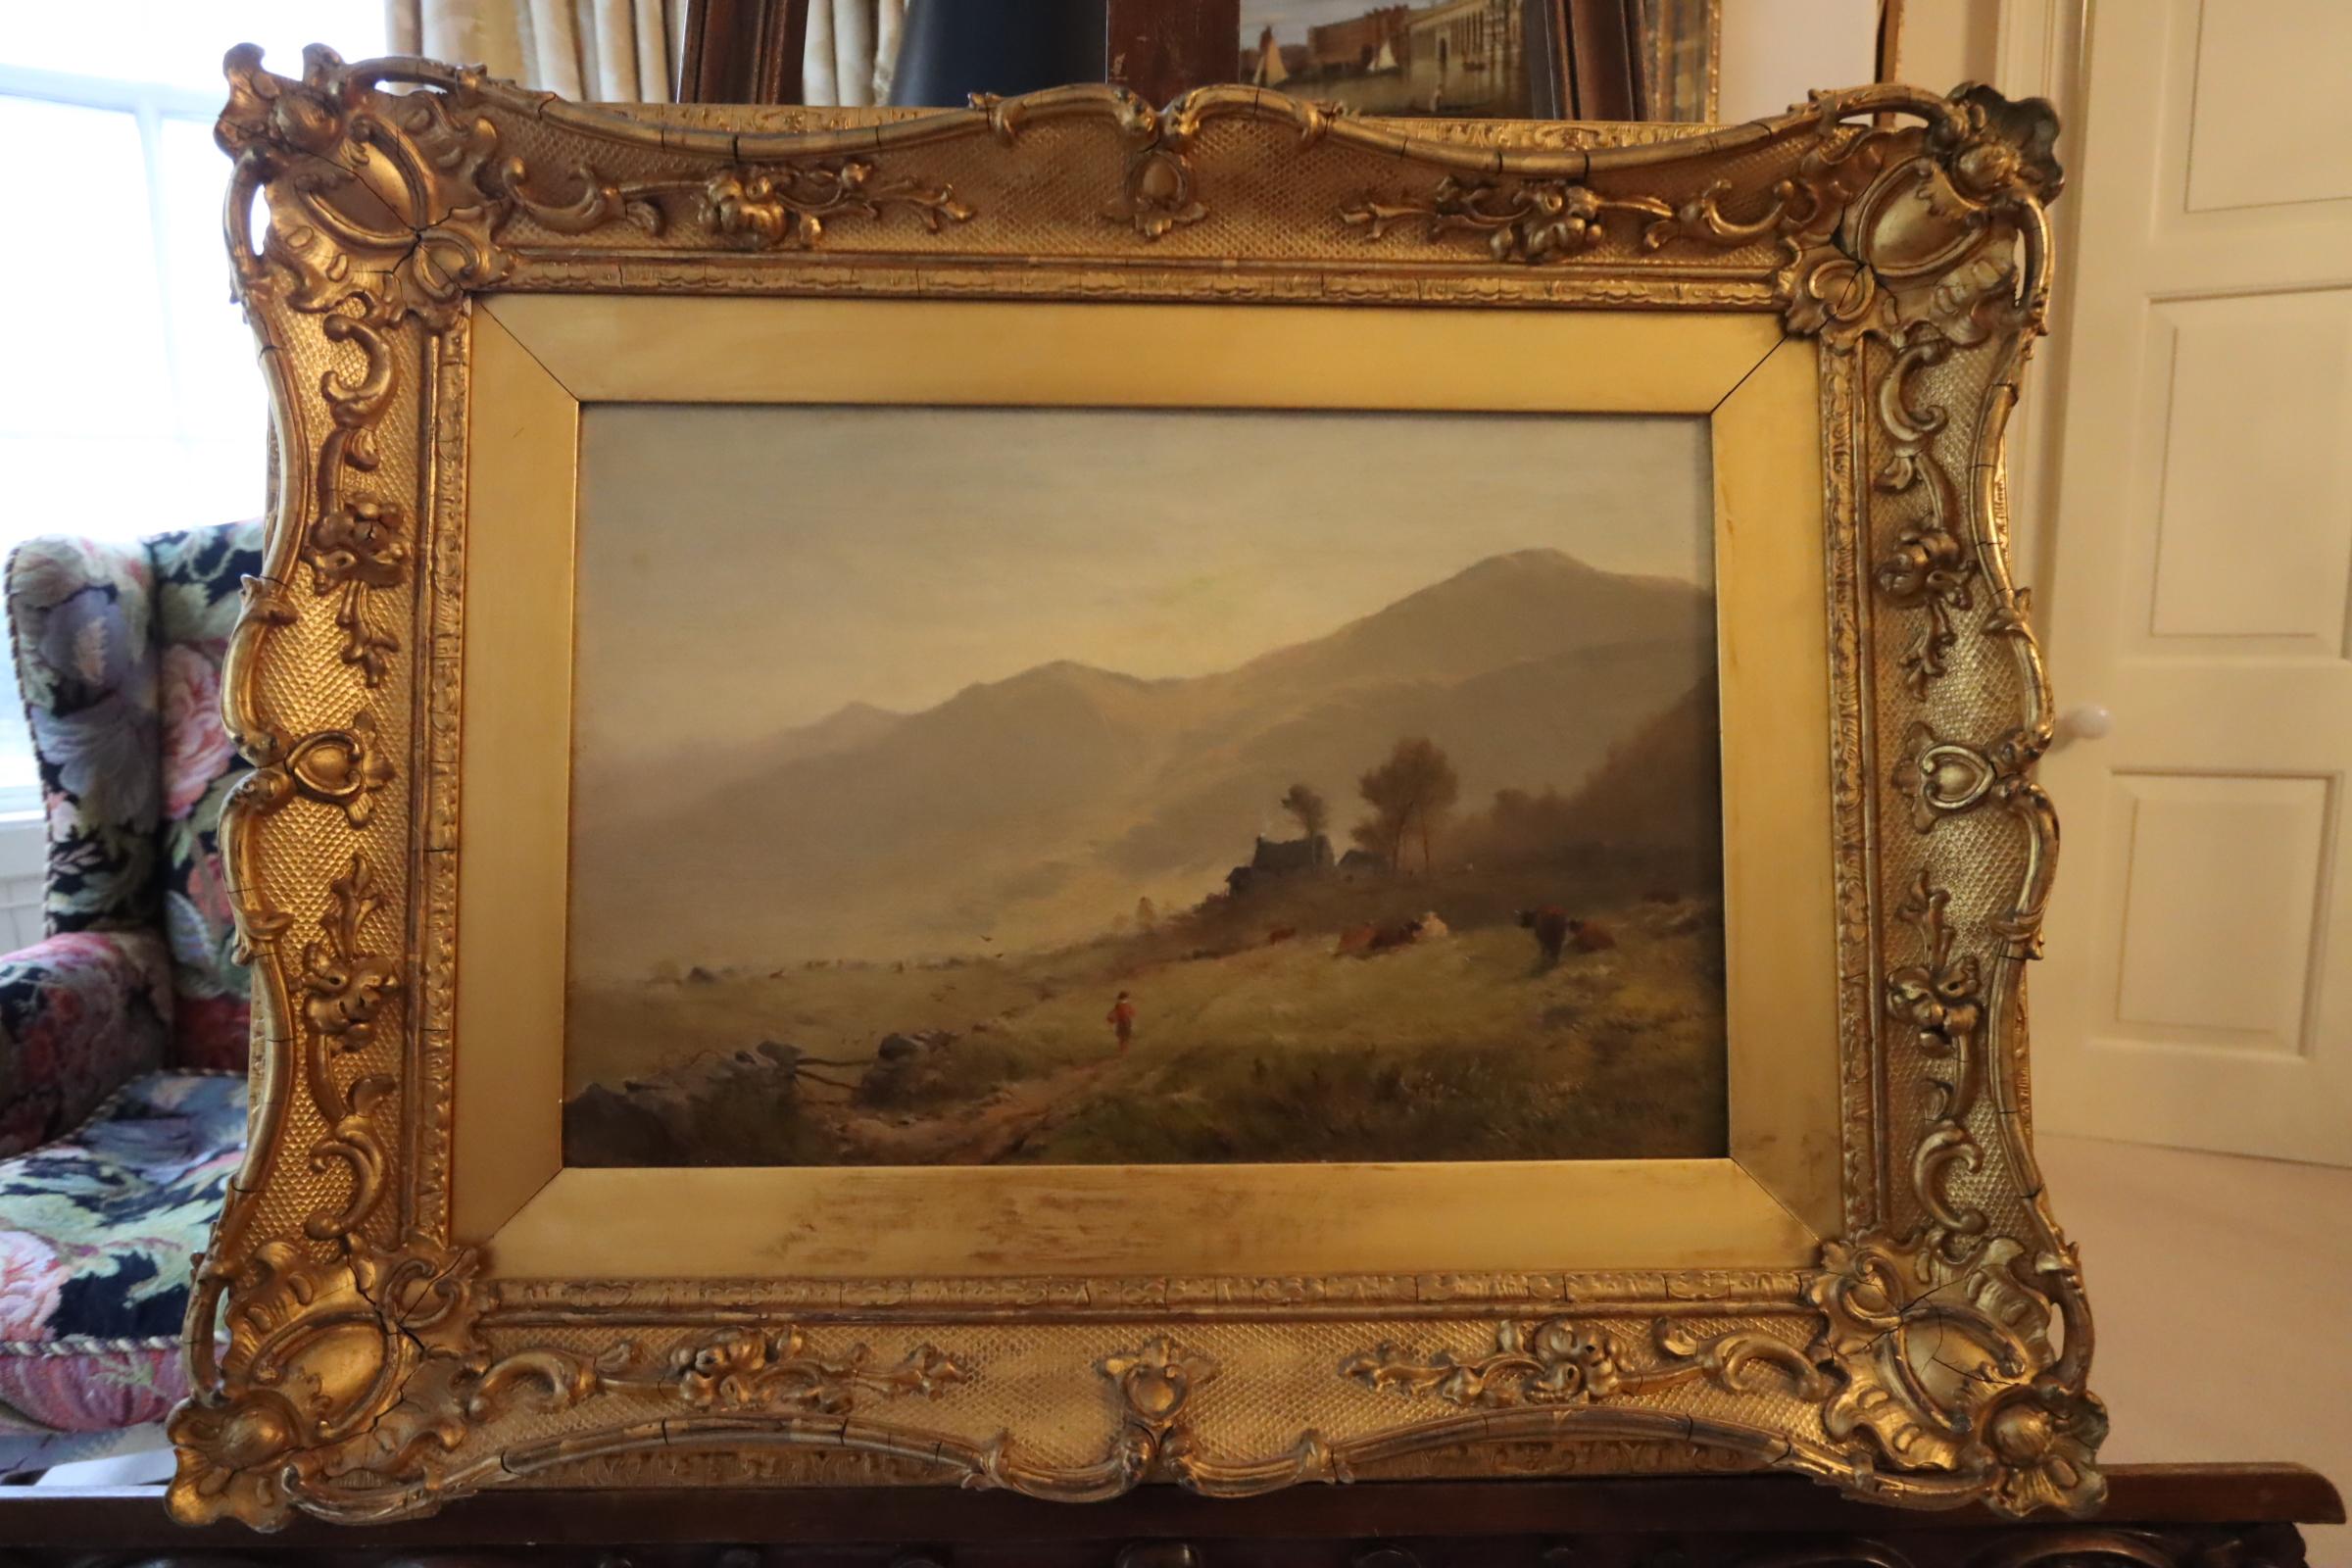 A beautiful depiction of a victorian British dairy farm and landscape, painted by Alfred Walter Williams (1824-1905). Oil on Canvas. 27” x 21” Framed. Signed lower right.

Alfred Walter Williams, born 18th July 1824 was an English landscape painter